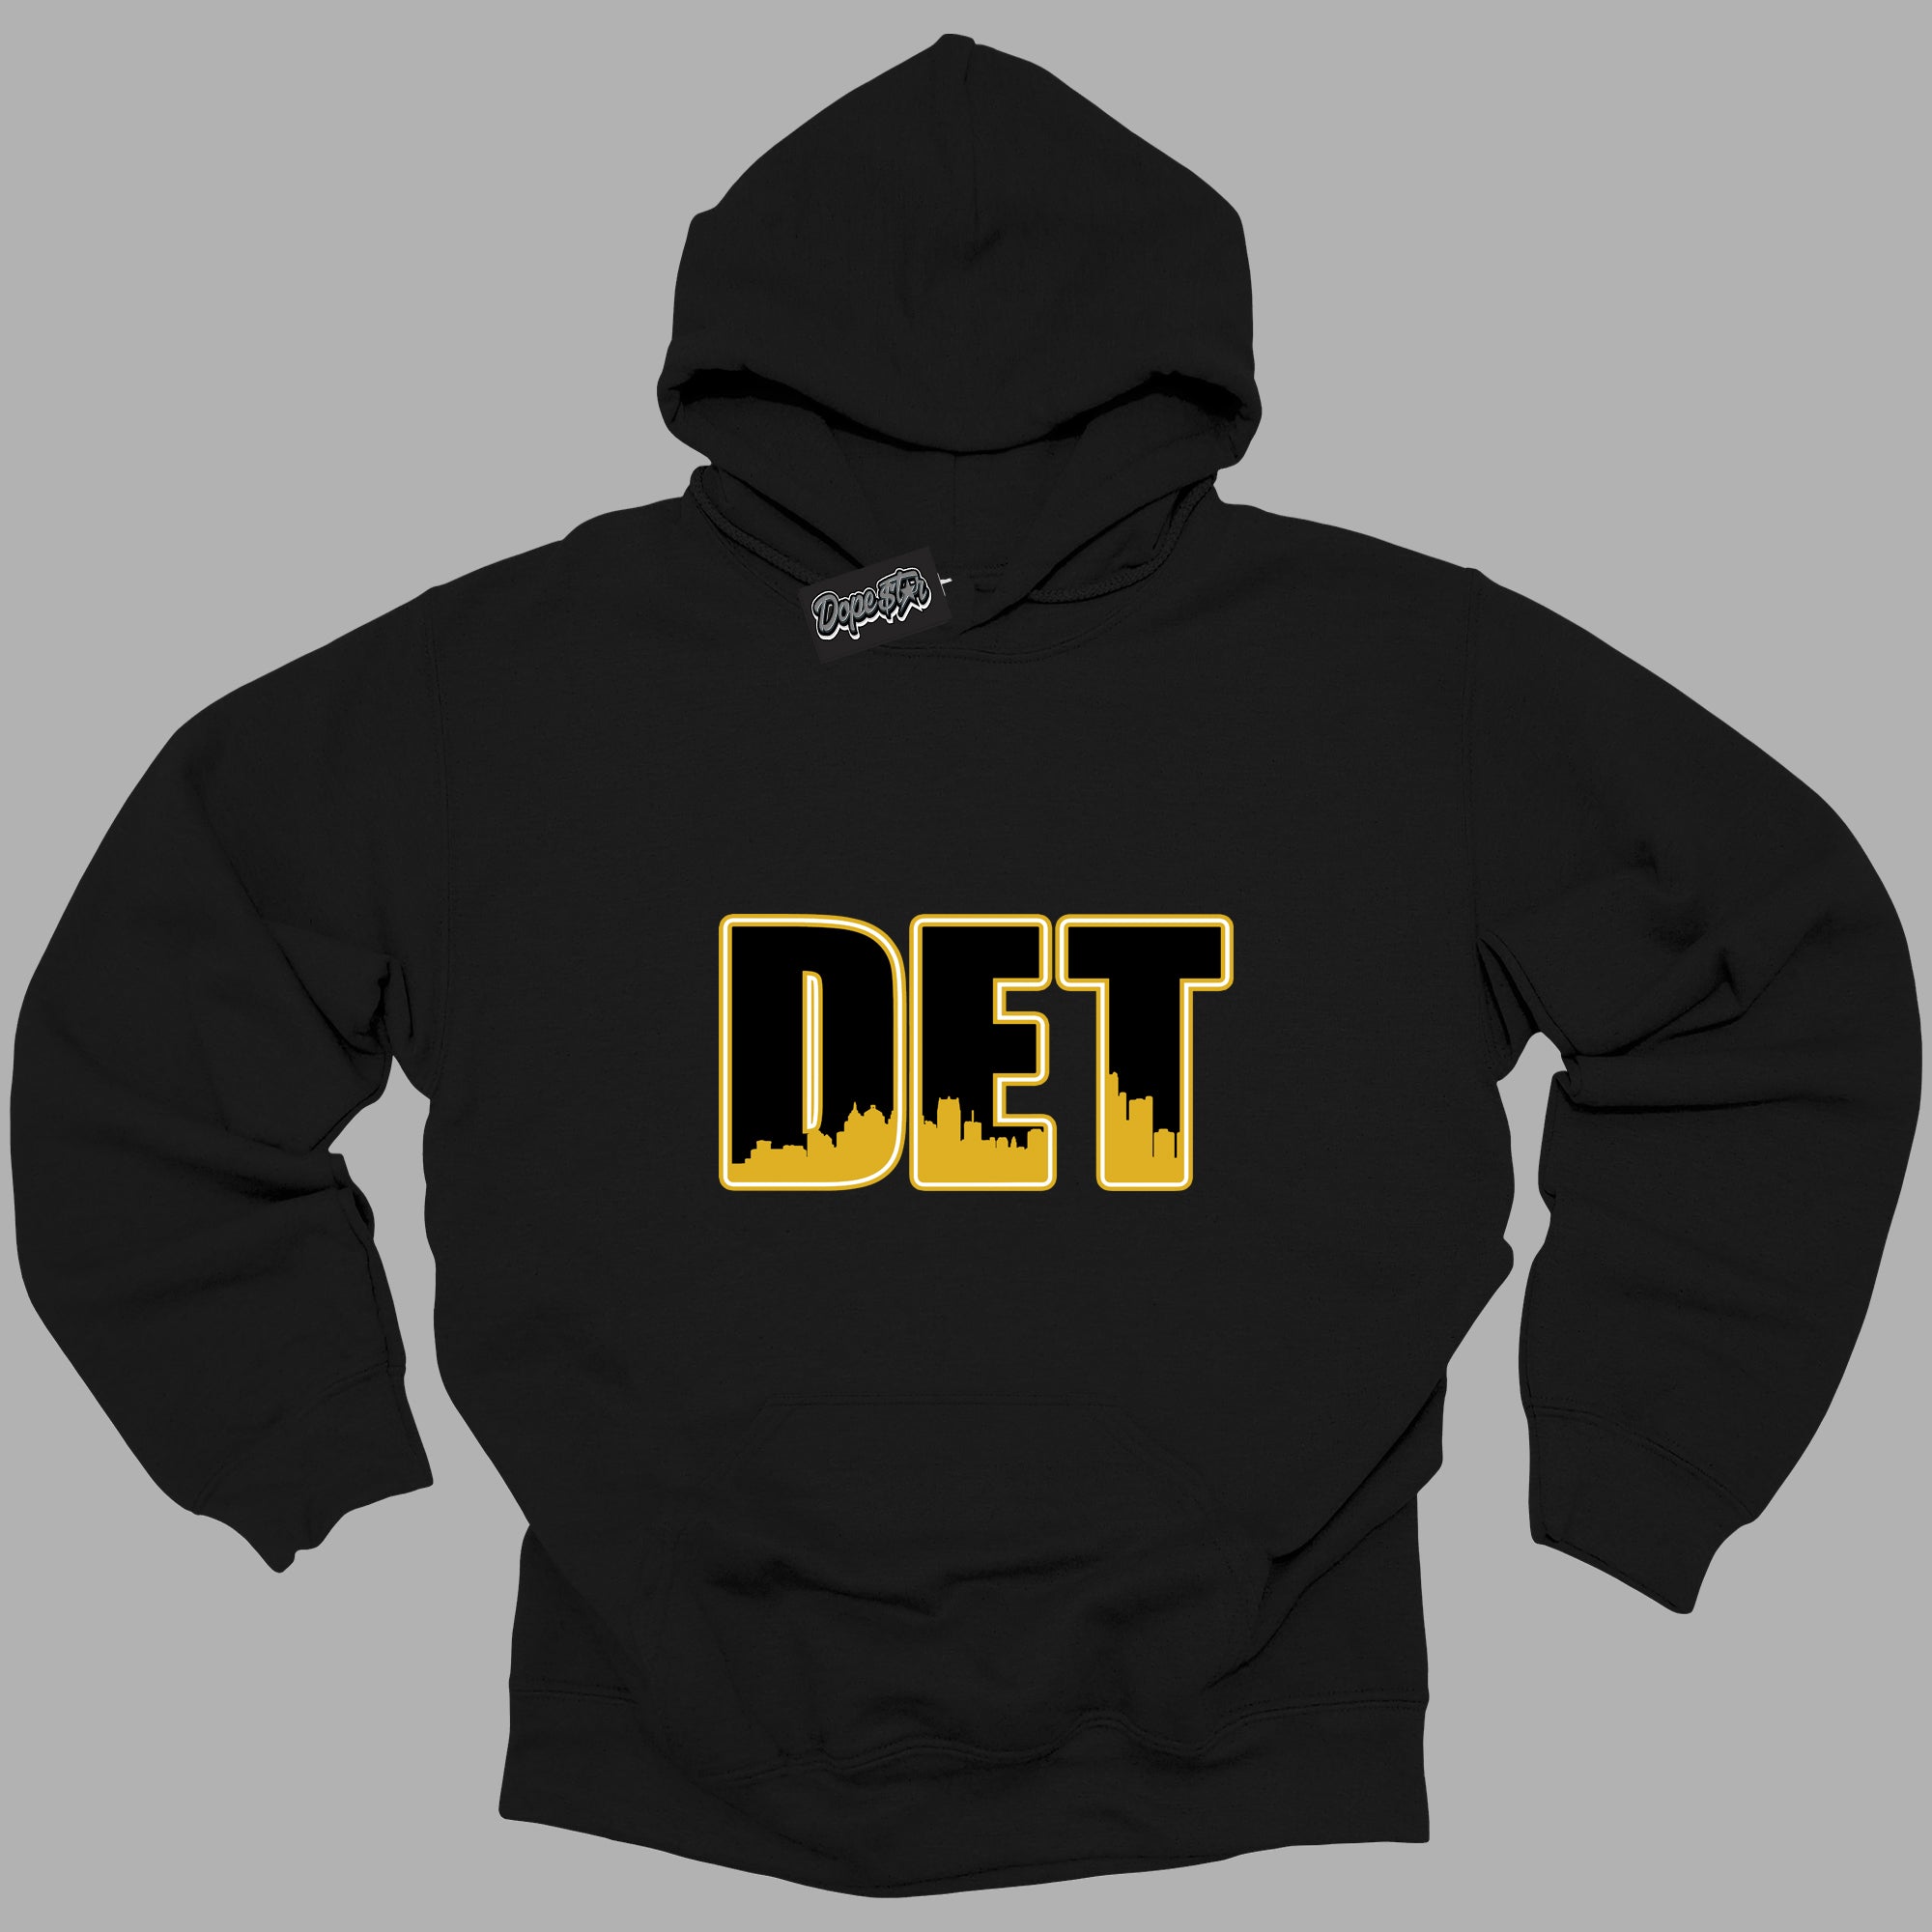 Cool Black Hoodie with “ Detroit ”  design that Perfectly Matches Yellow Ochre 6s Sneakers.